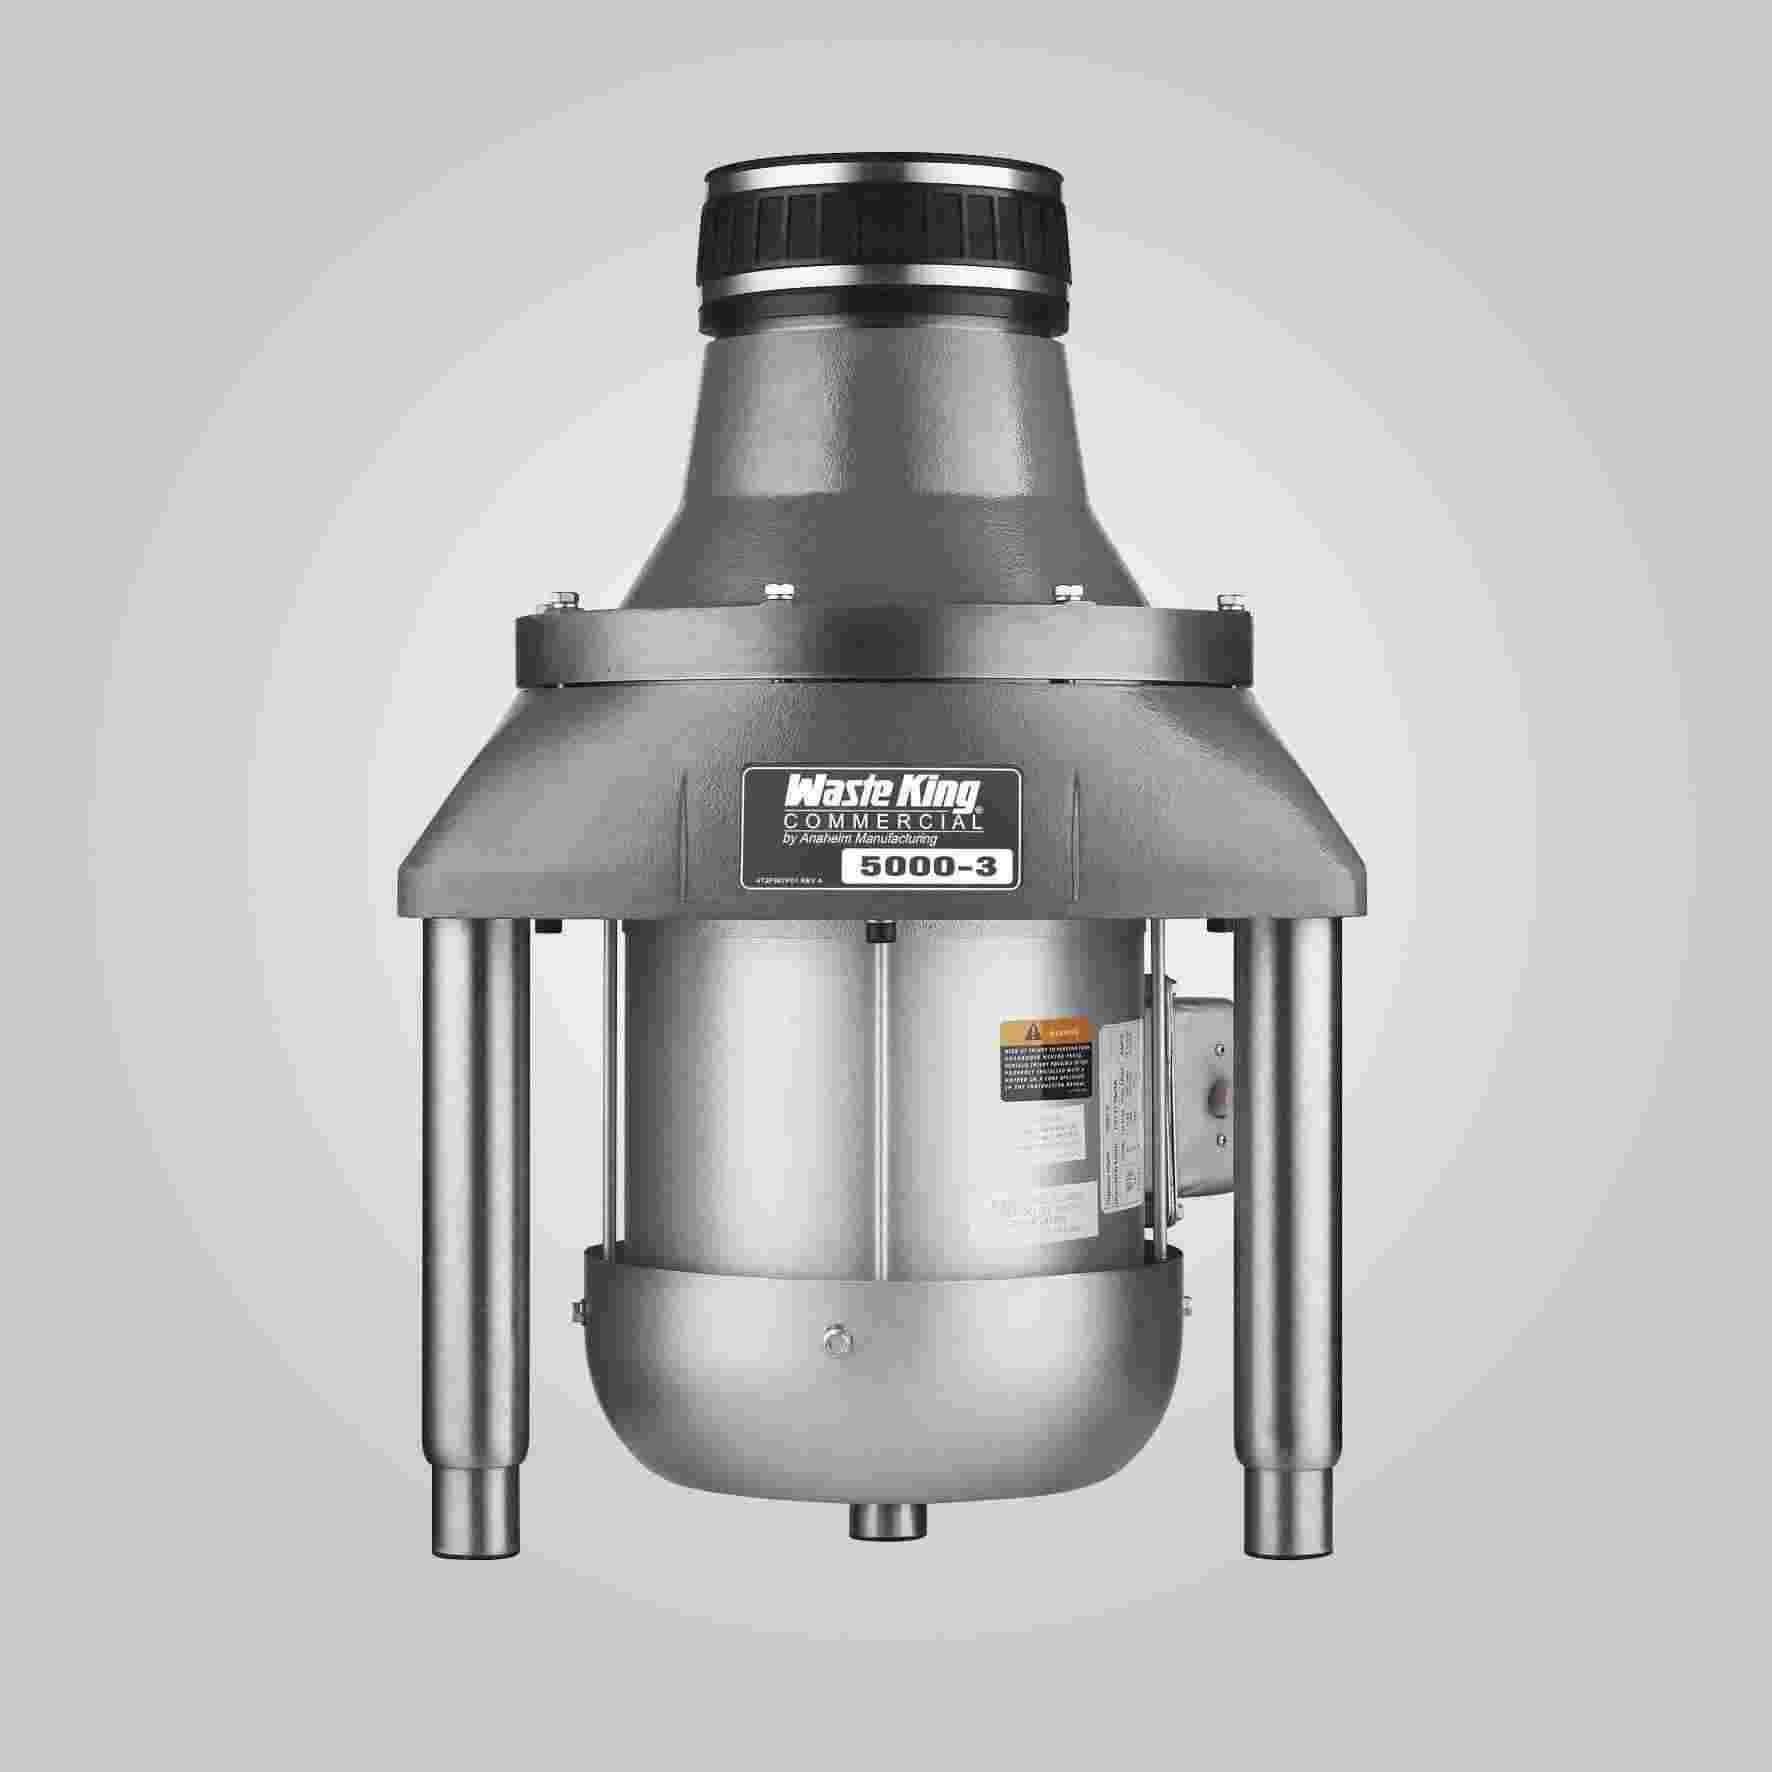 Waste King Commercial Disposer Systems (5000-3)